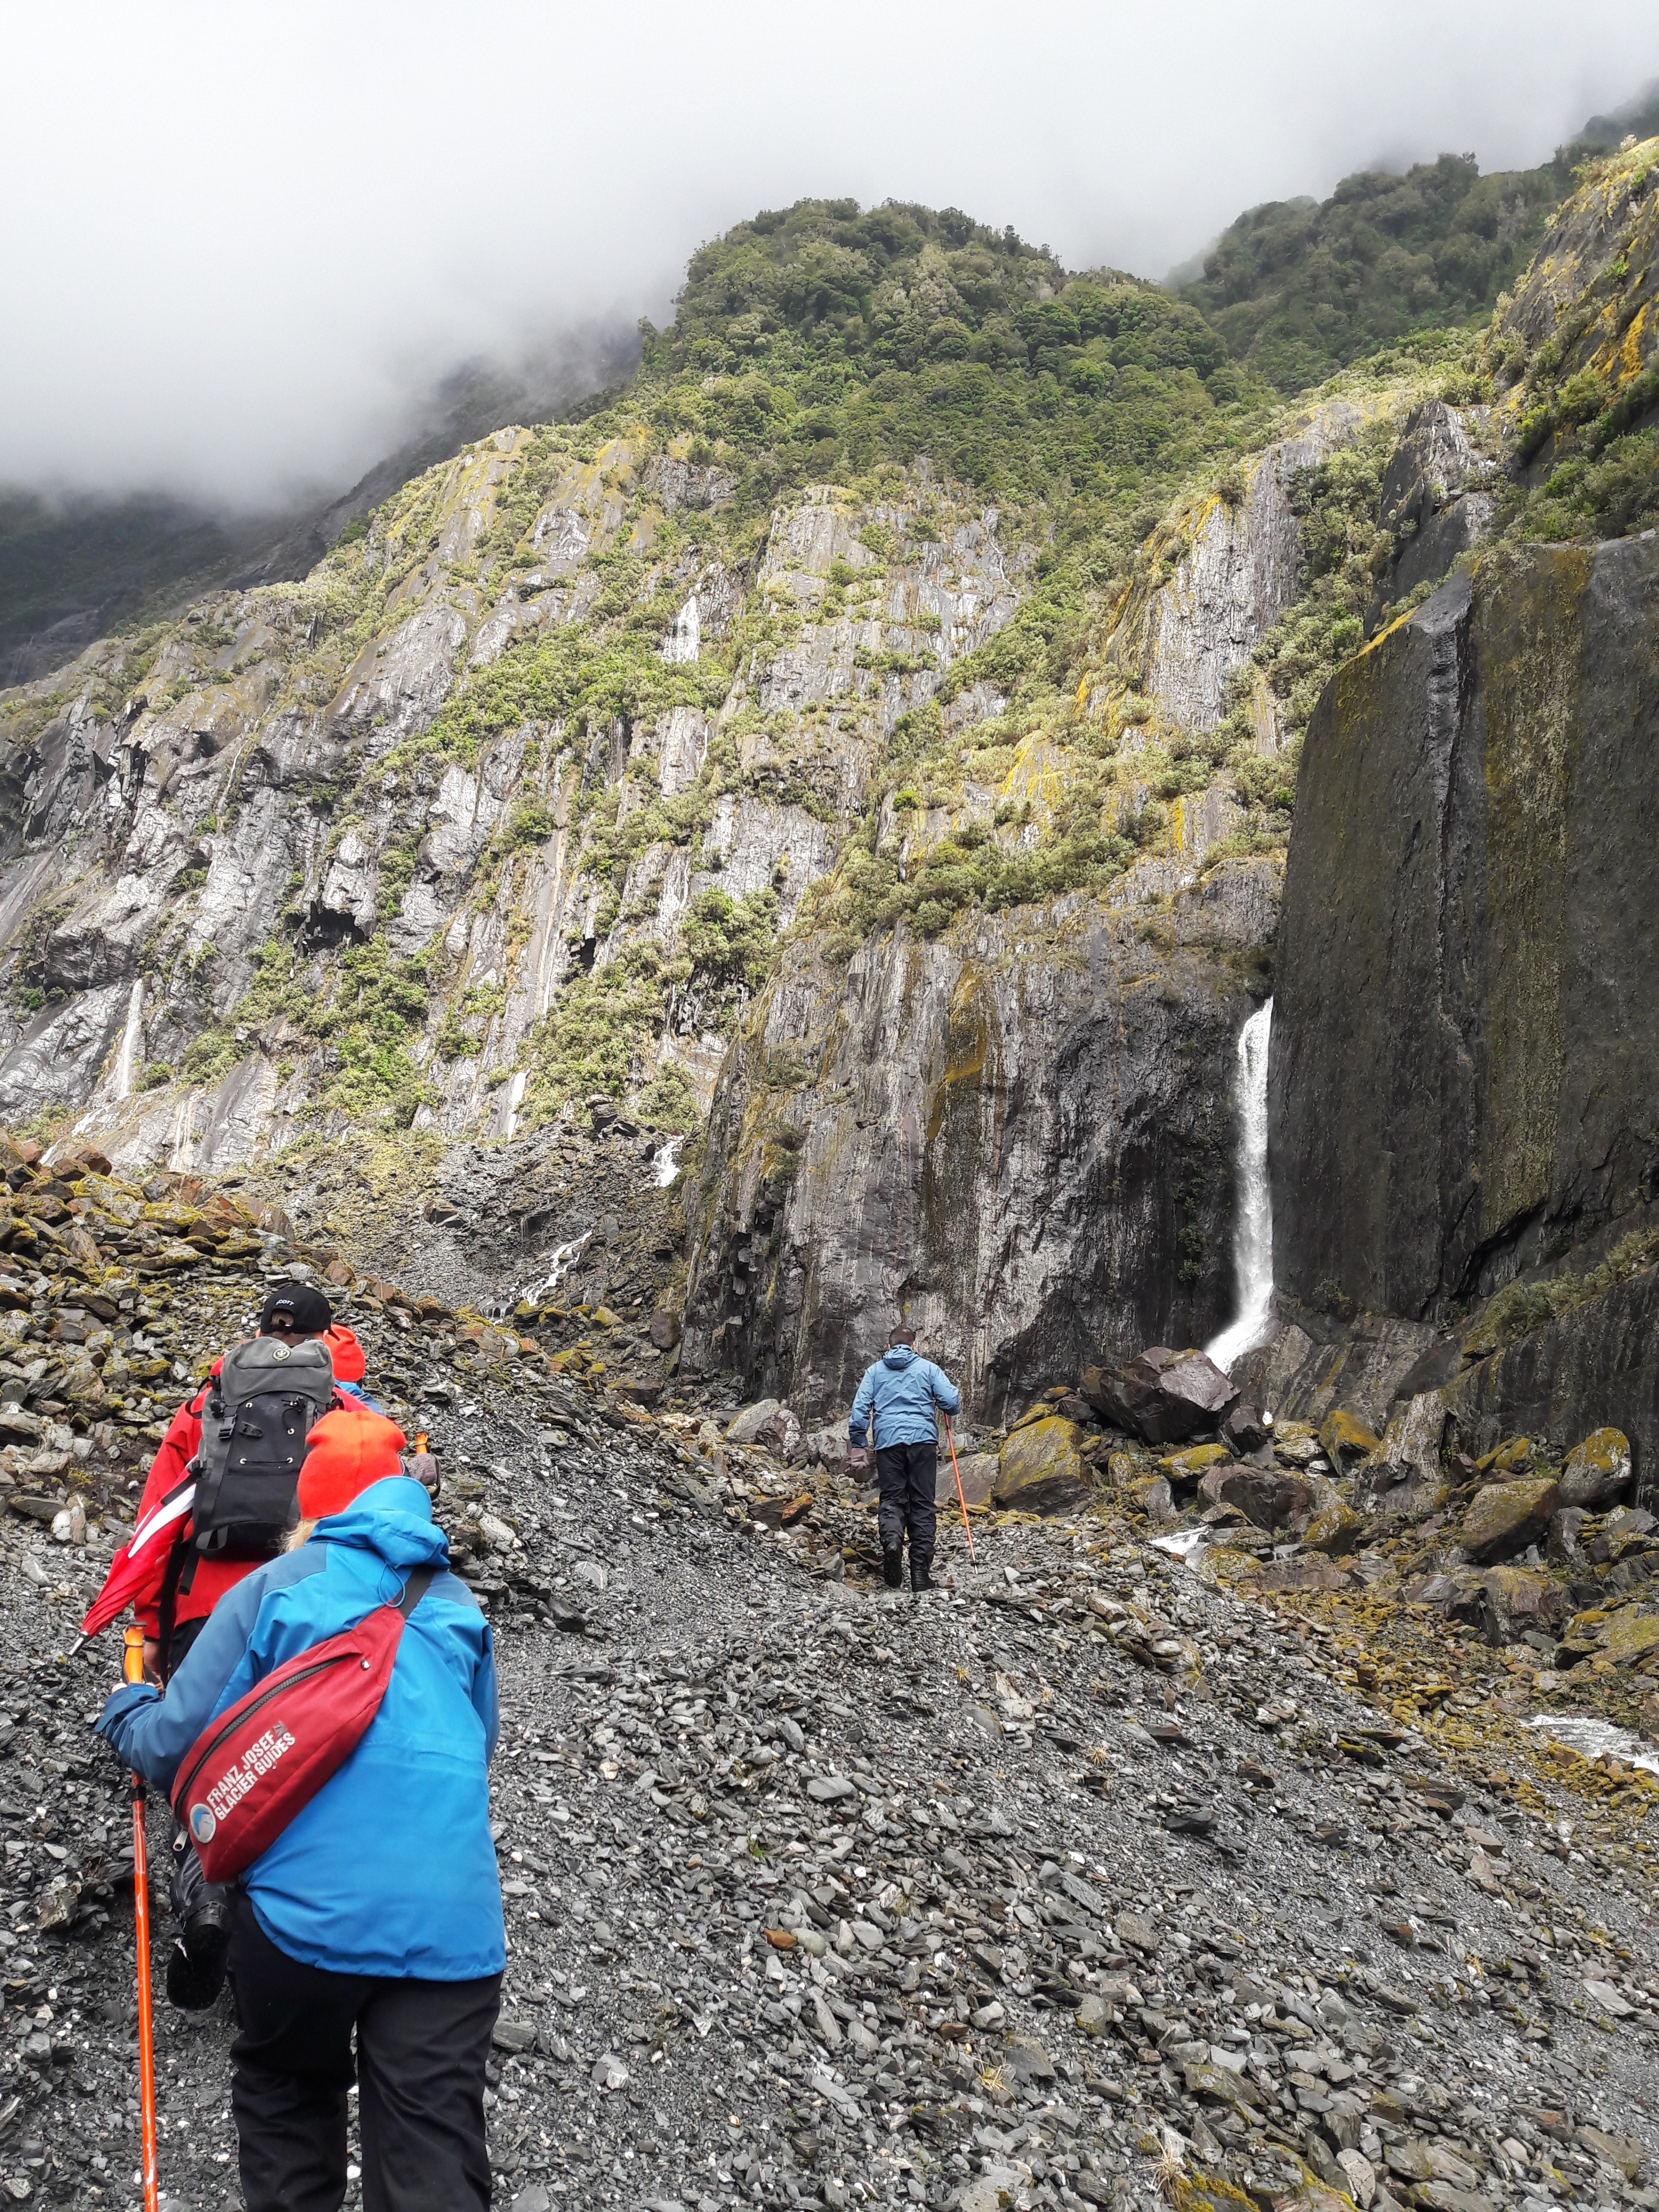 The Franz Josef Glacier trek is family-friendly and anybody can do it